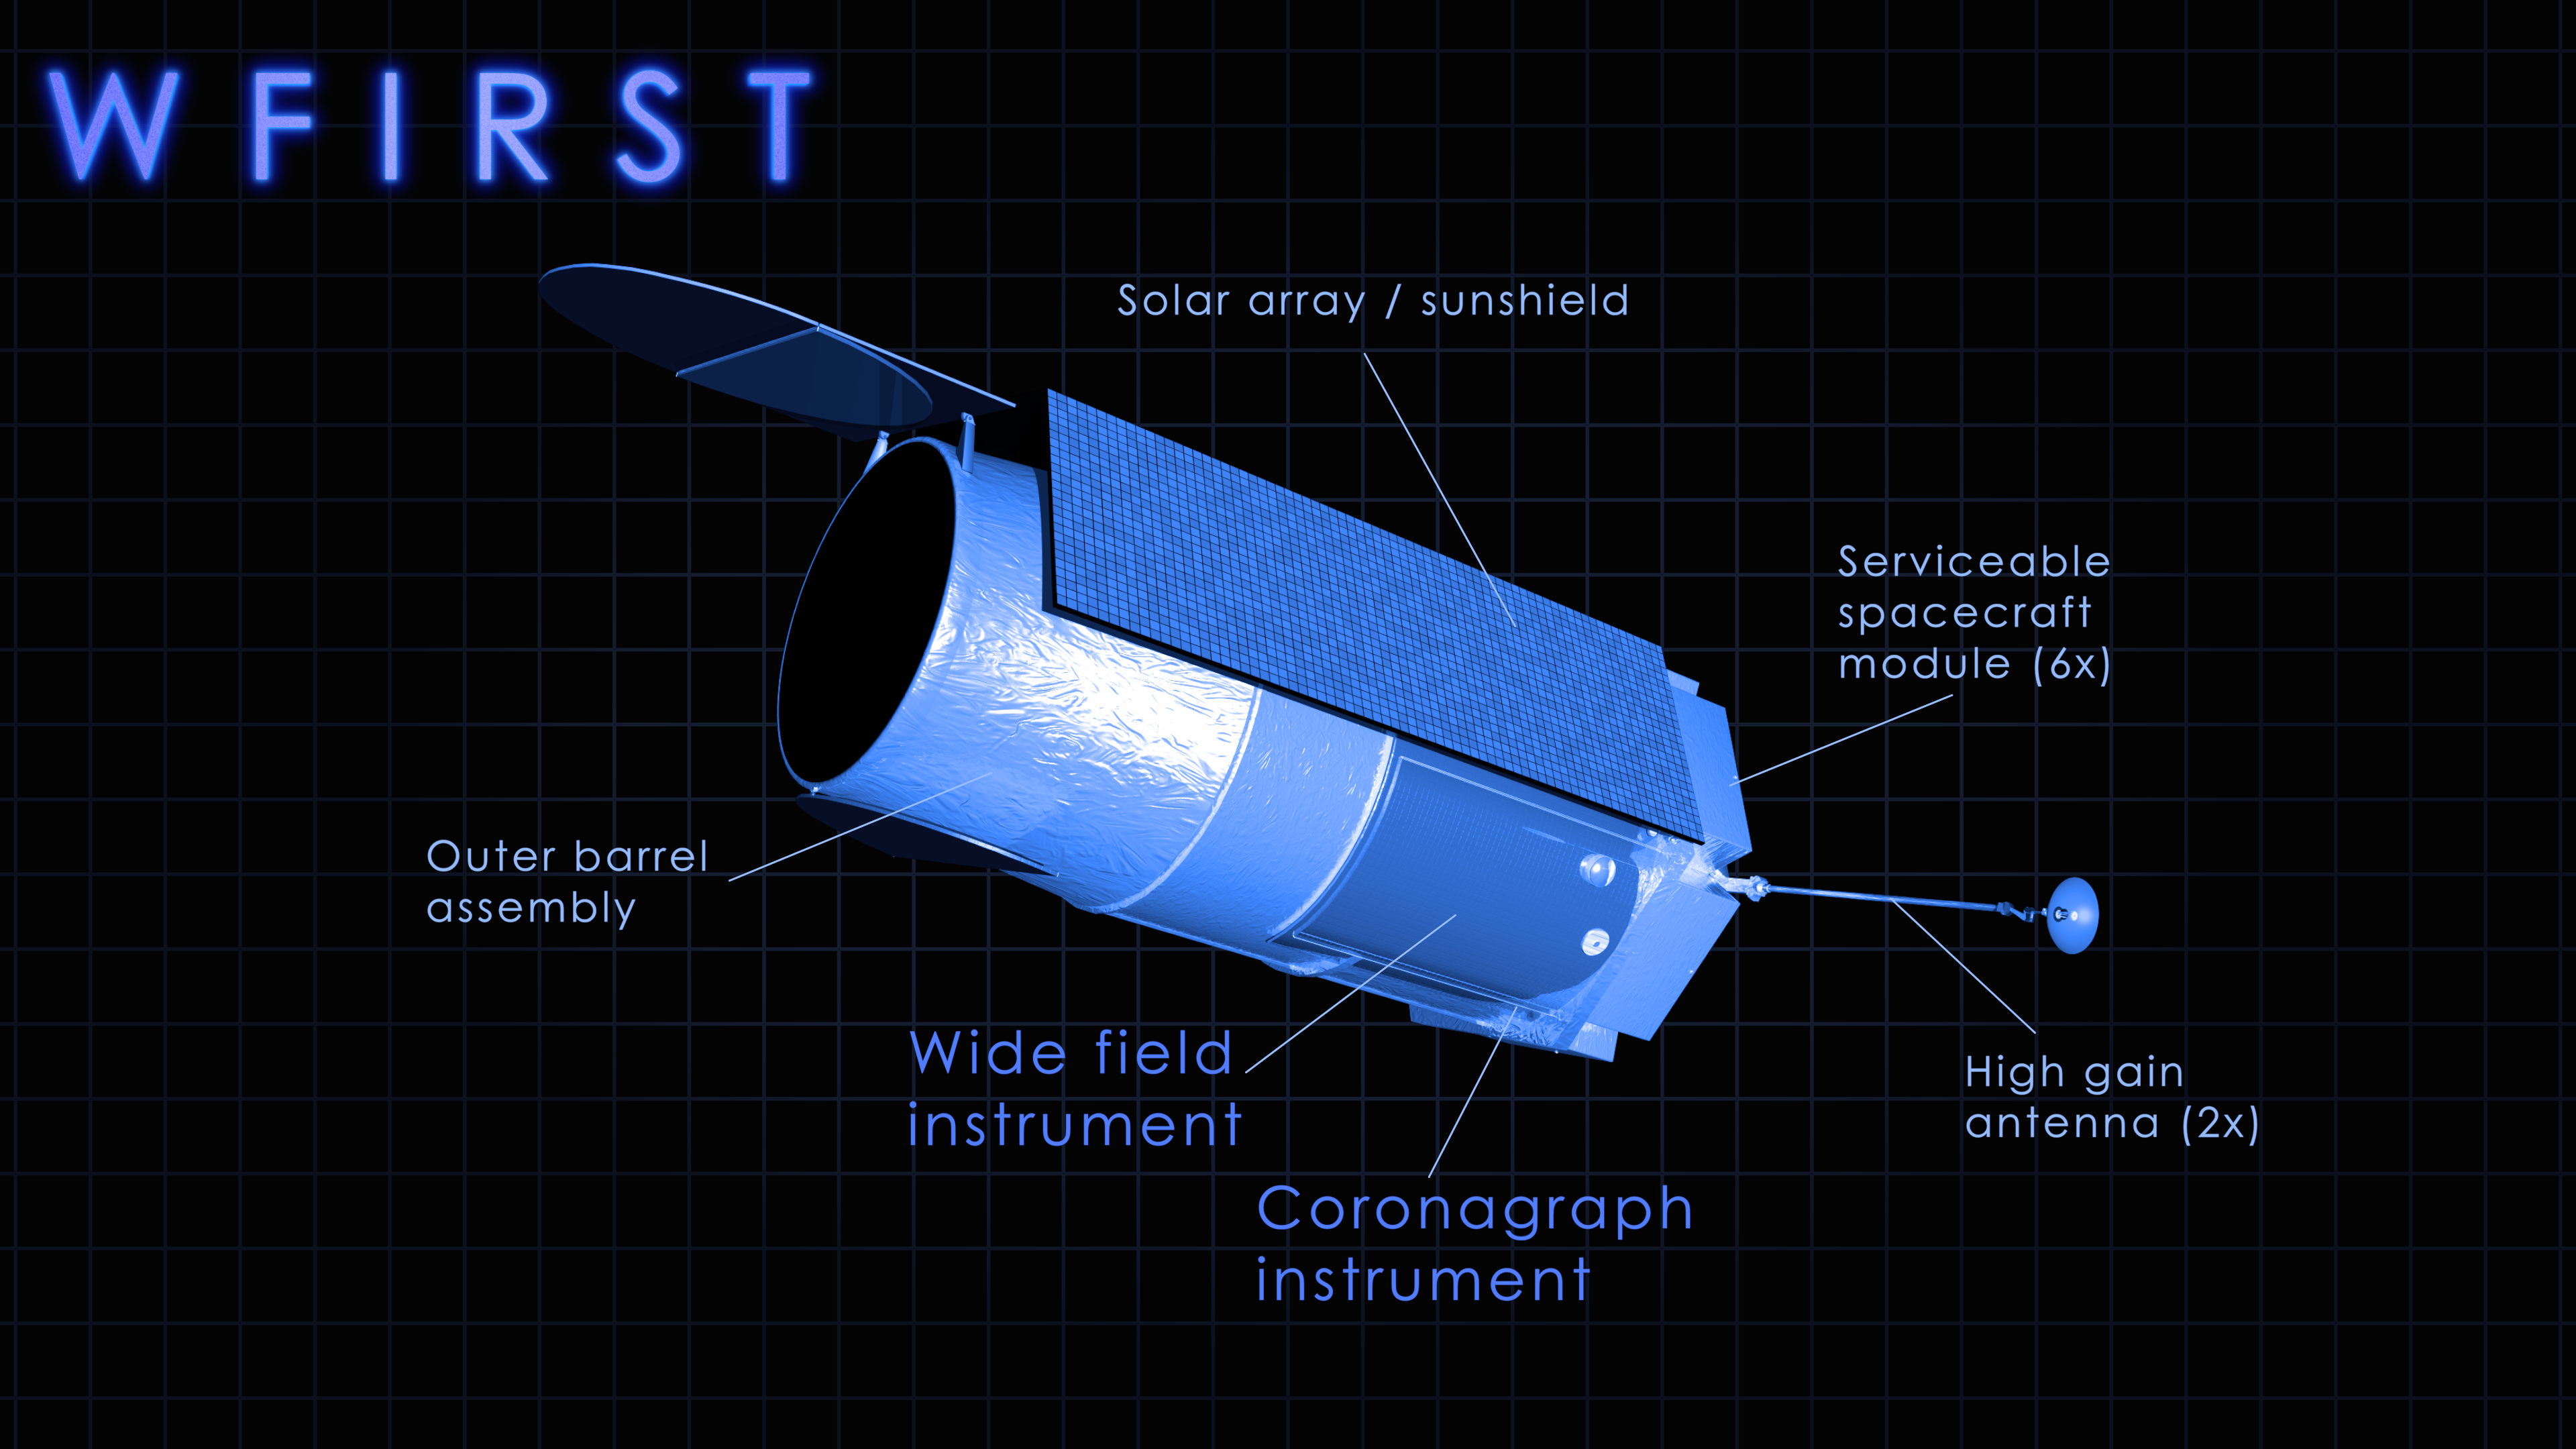 Still image breakdown of the key features of the WFIRST spacecraft